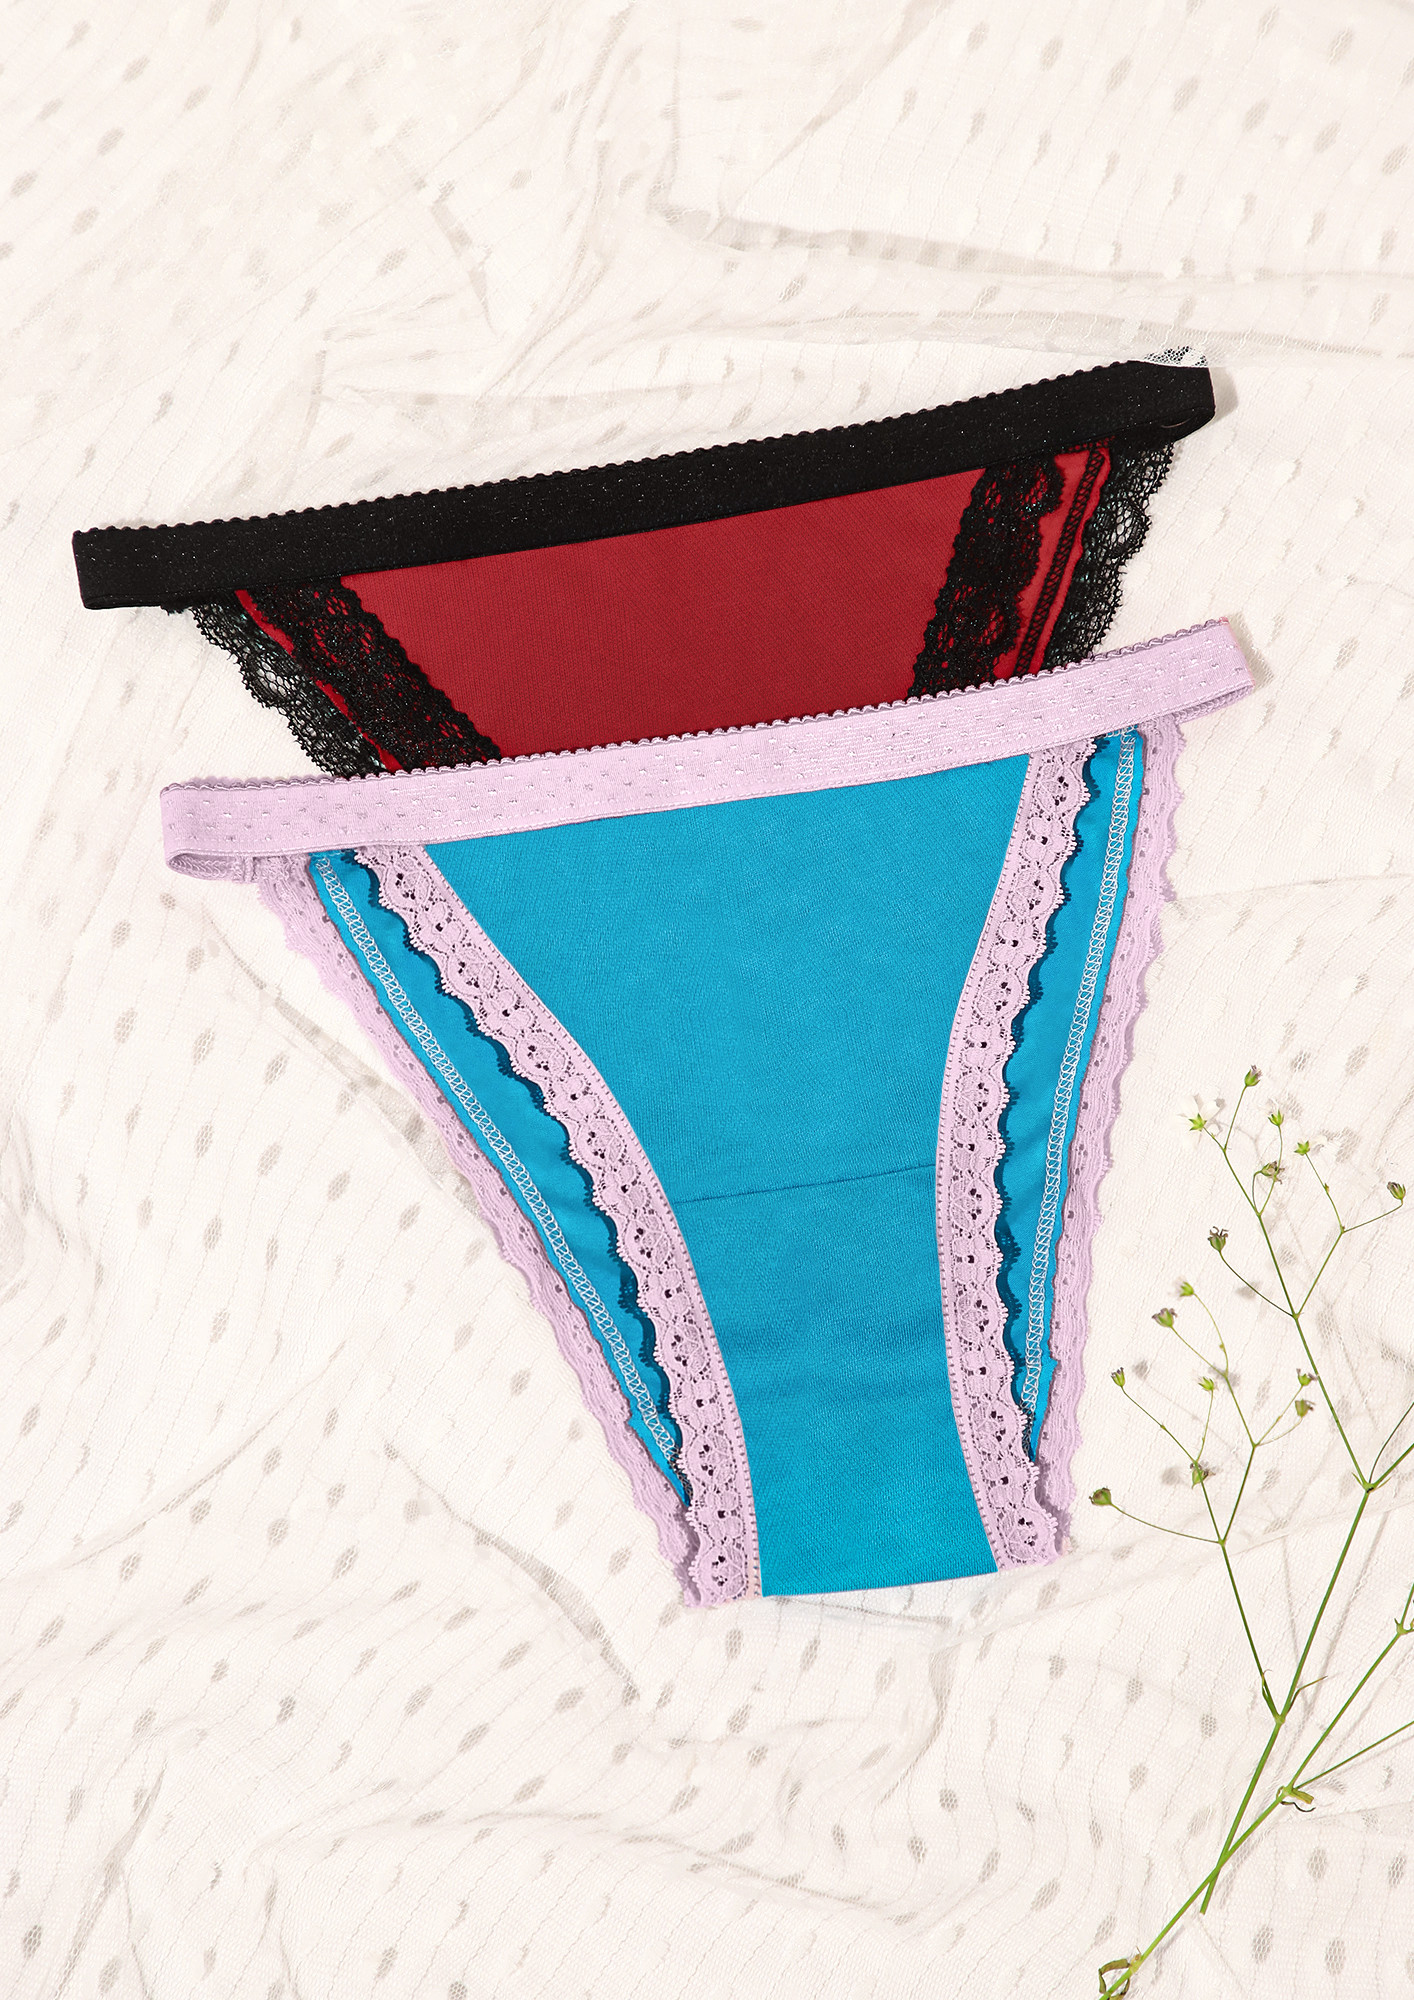 TRIMMED LACE PINK AND BLUE BIKINI BOTTOMS SET OF 2